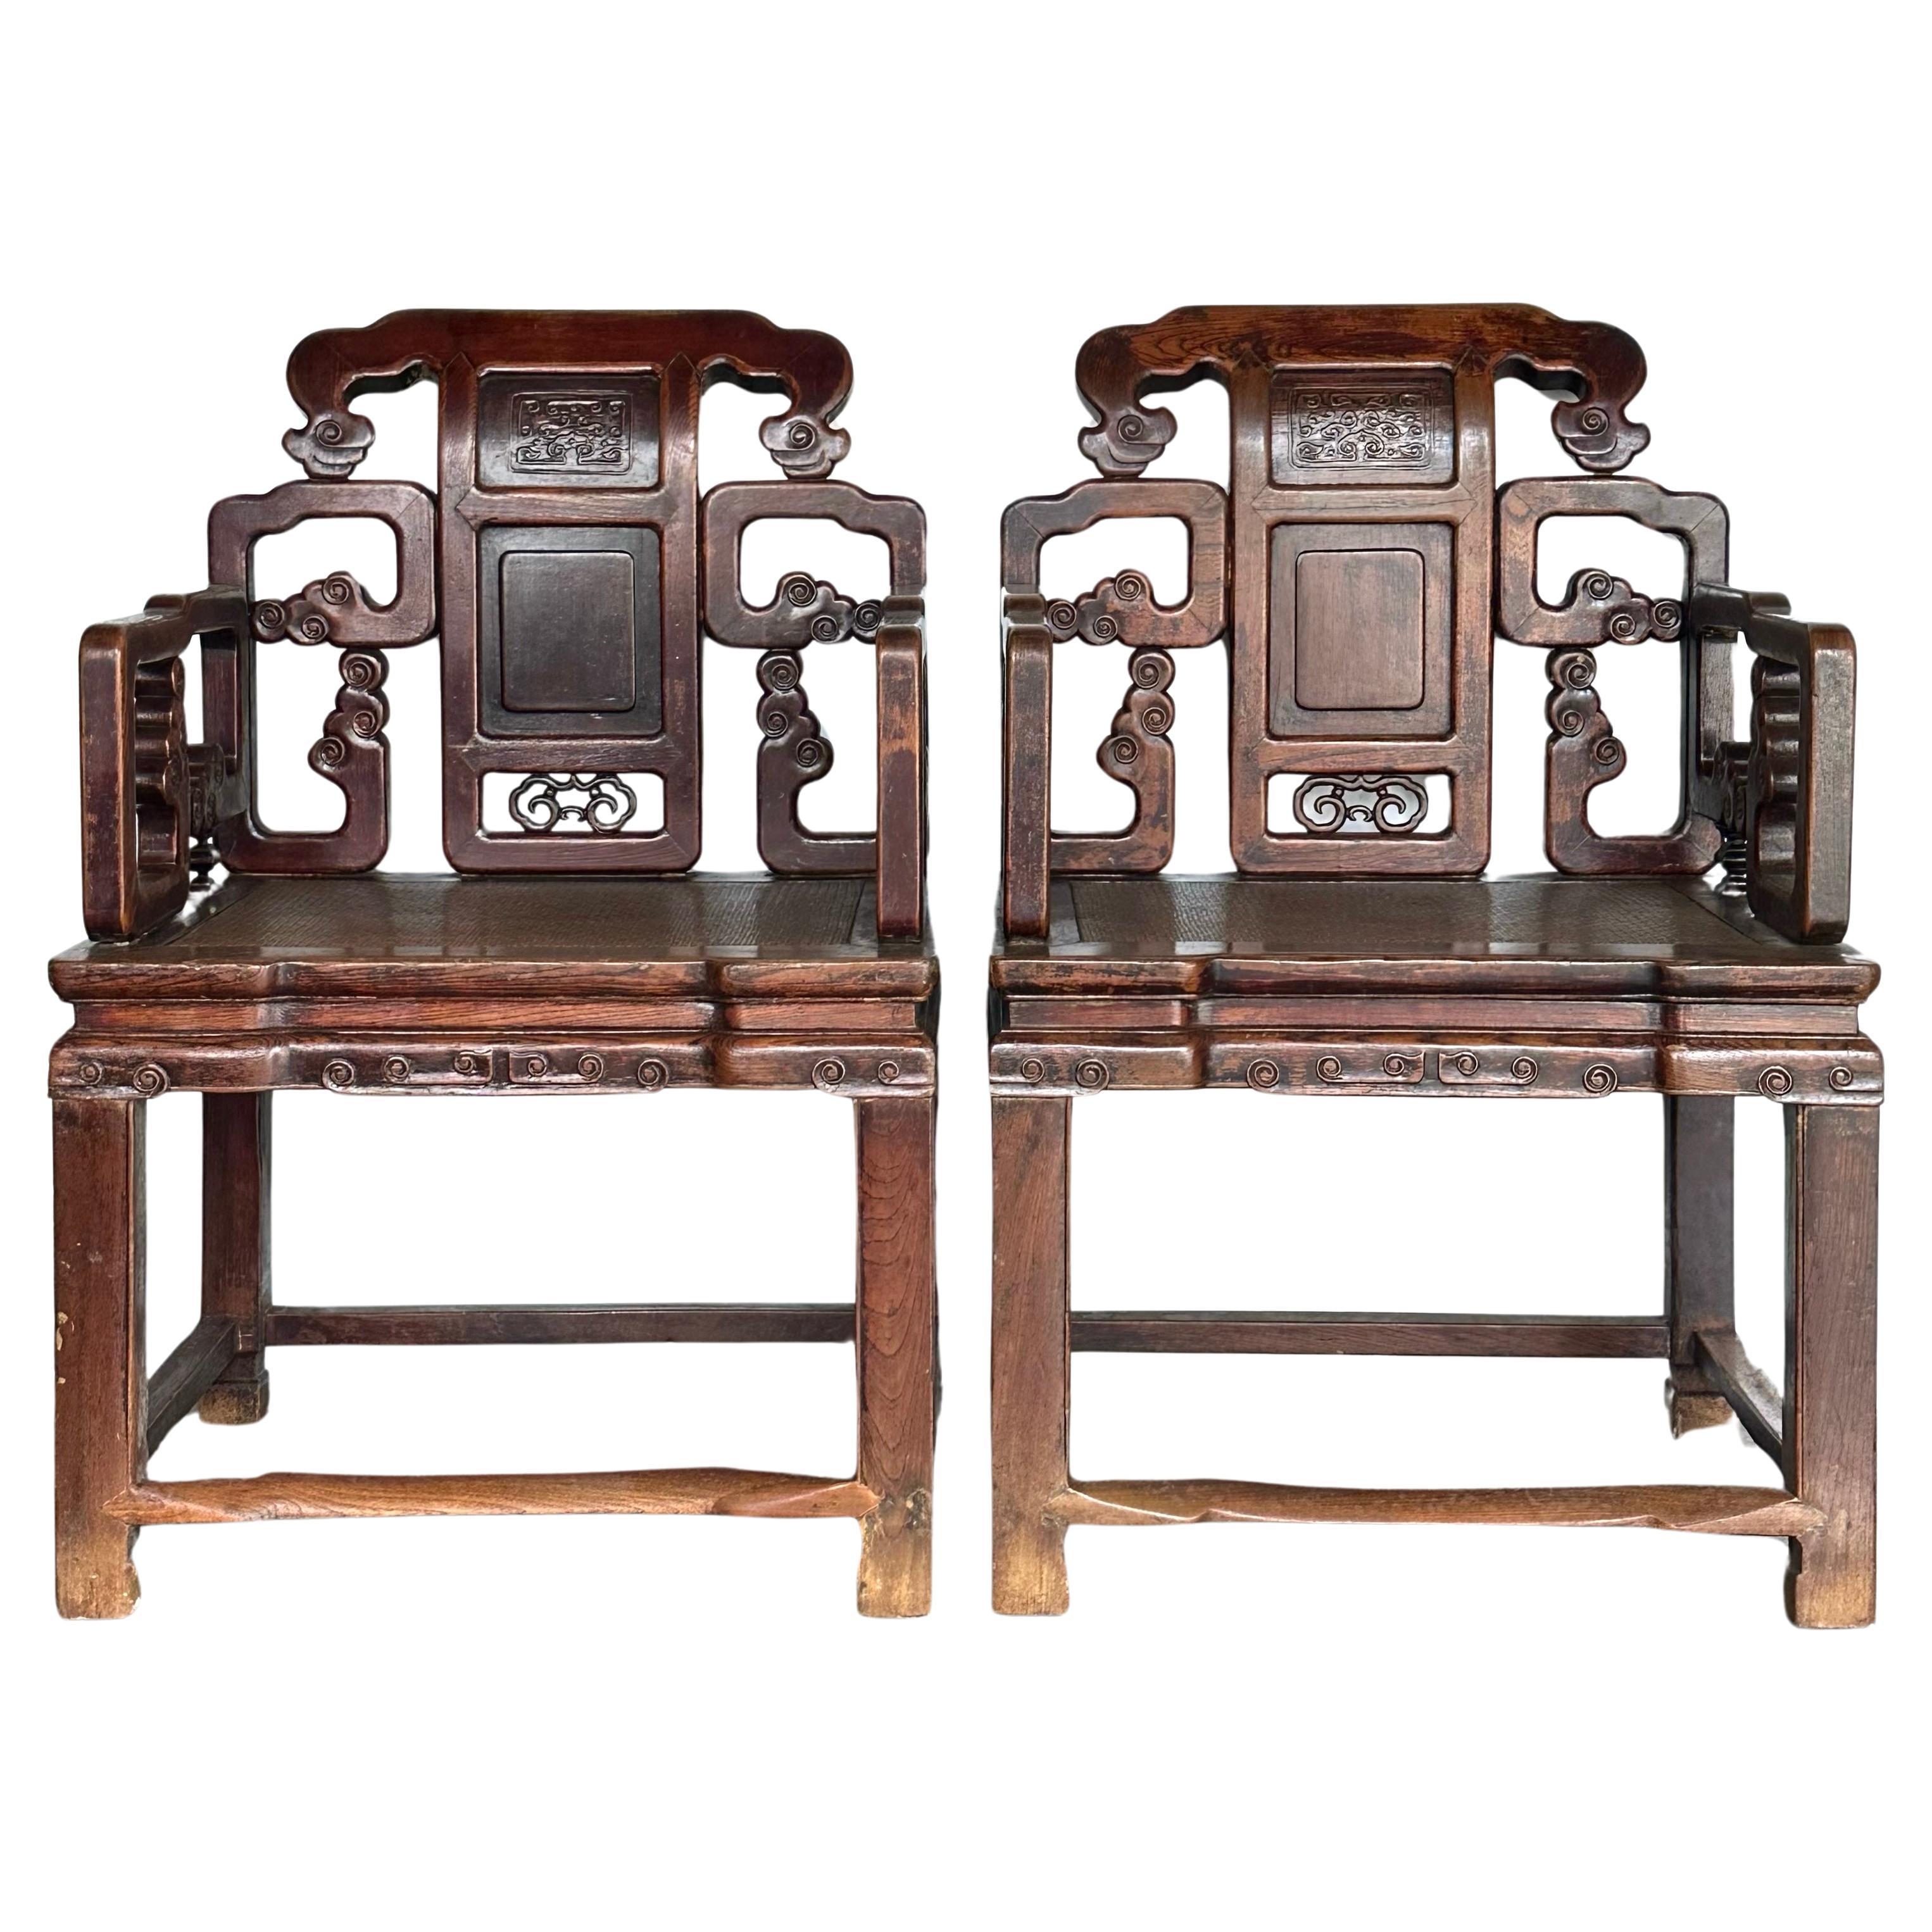 A Pair of Late Qing Large Jumu Armchairs